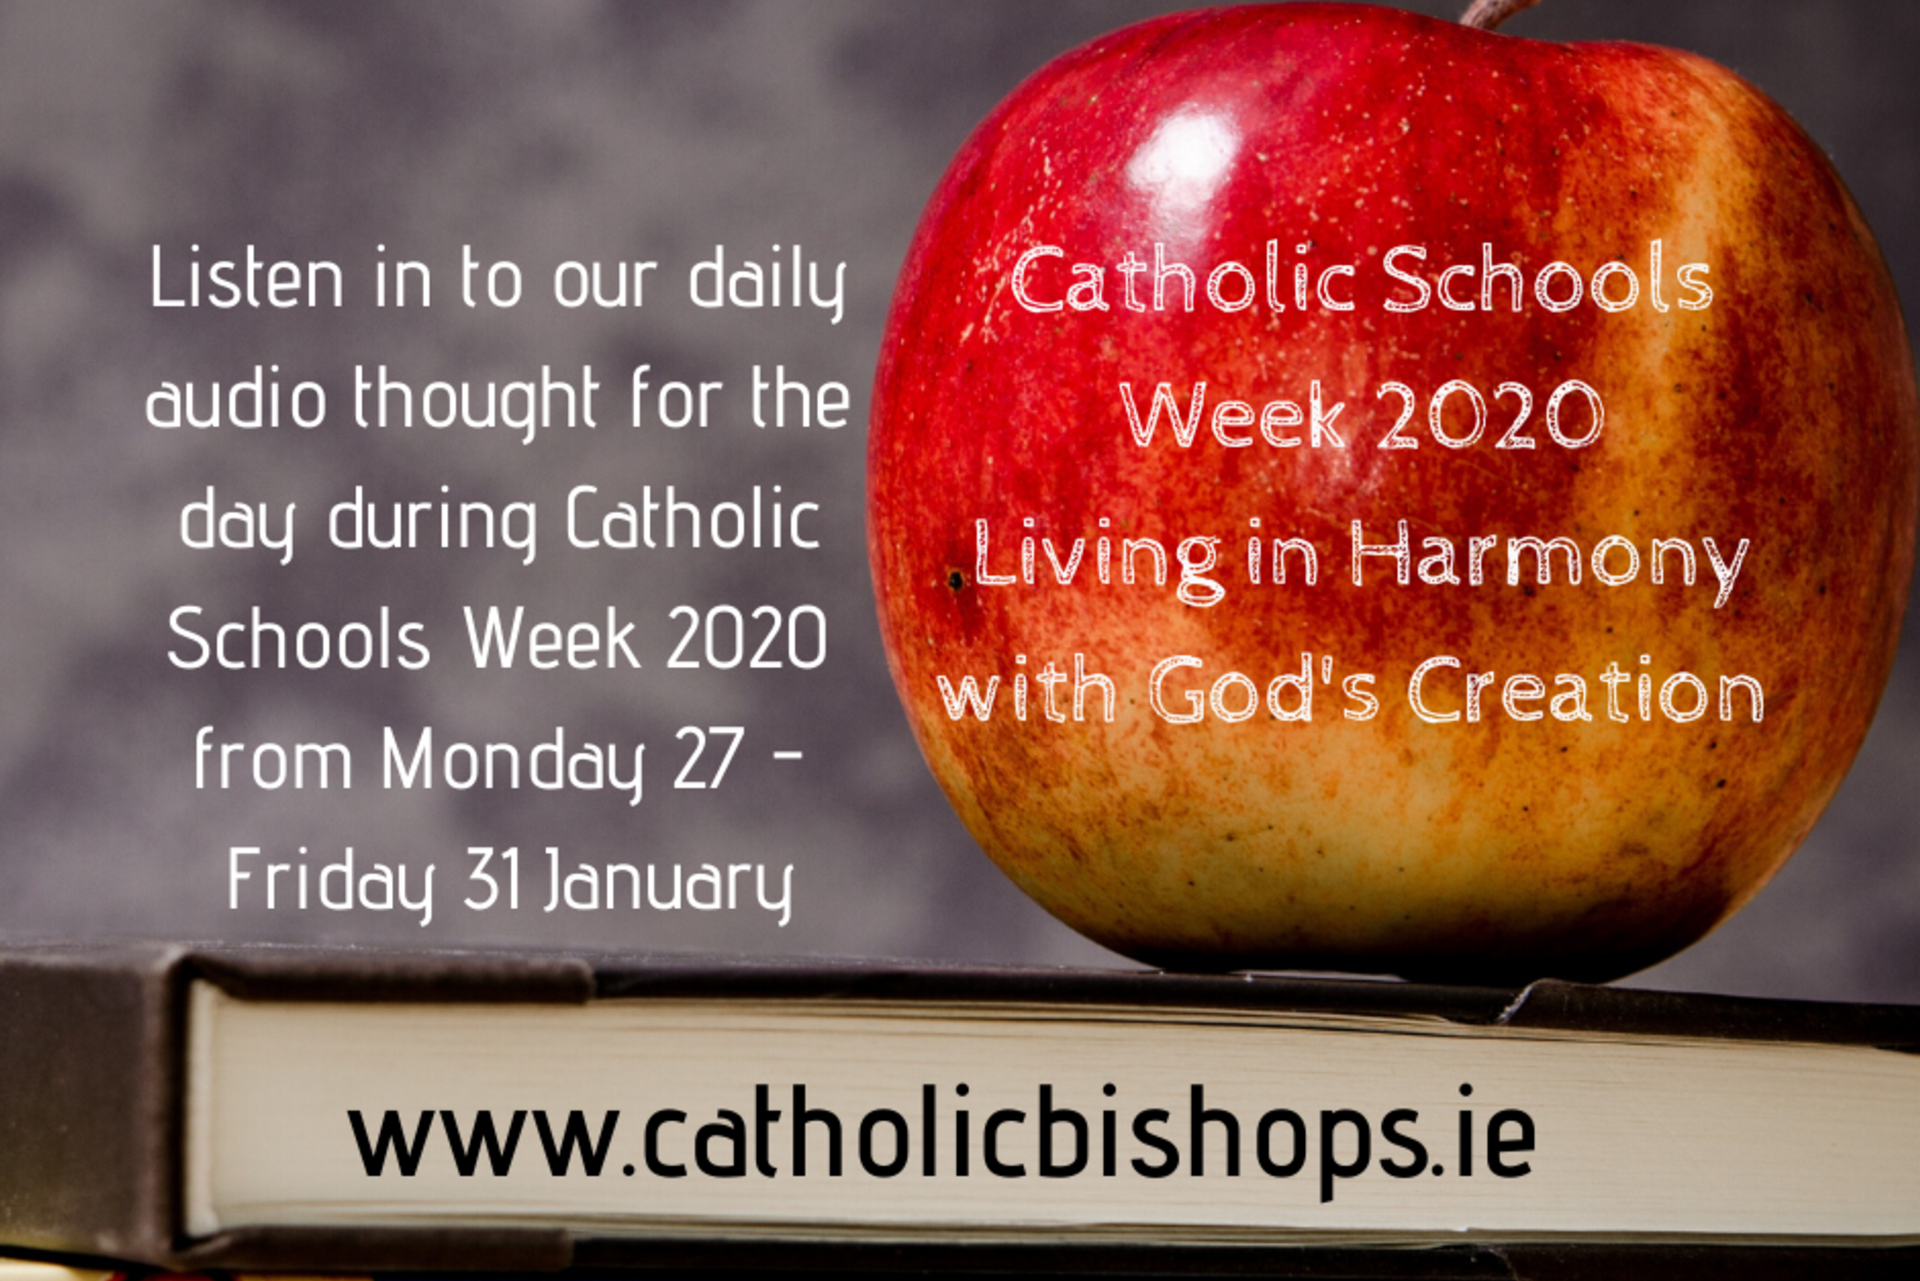 New audio and Resources for Tuesday of Catholic Schools Week 2020